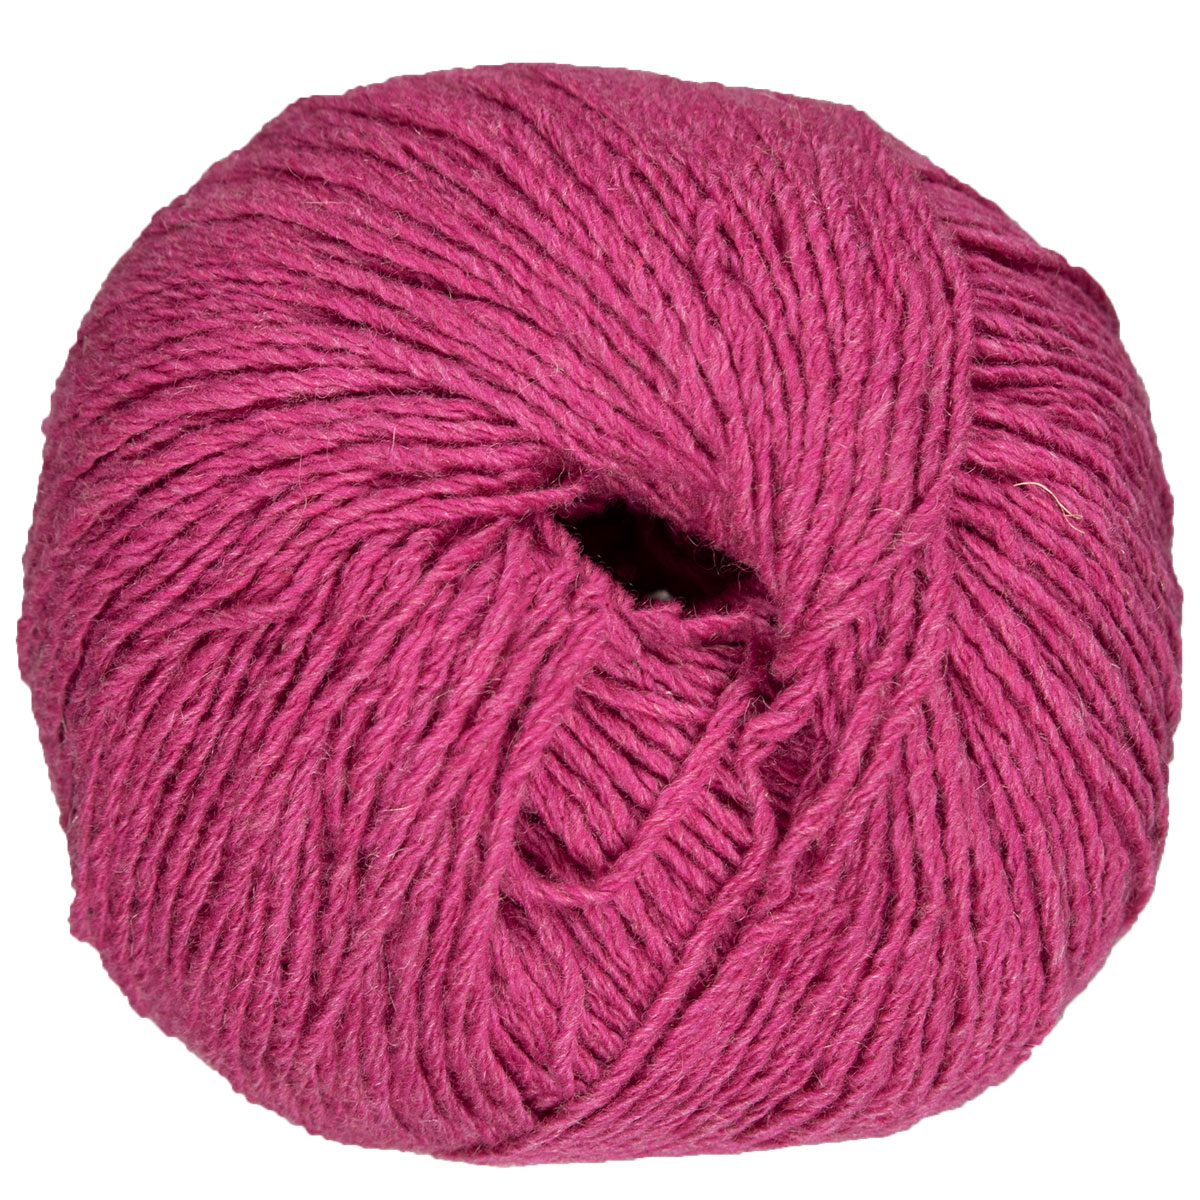 Simply Shetland Lambswool & Cashmere Yarn - 45 Clio at Jimmy Beans